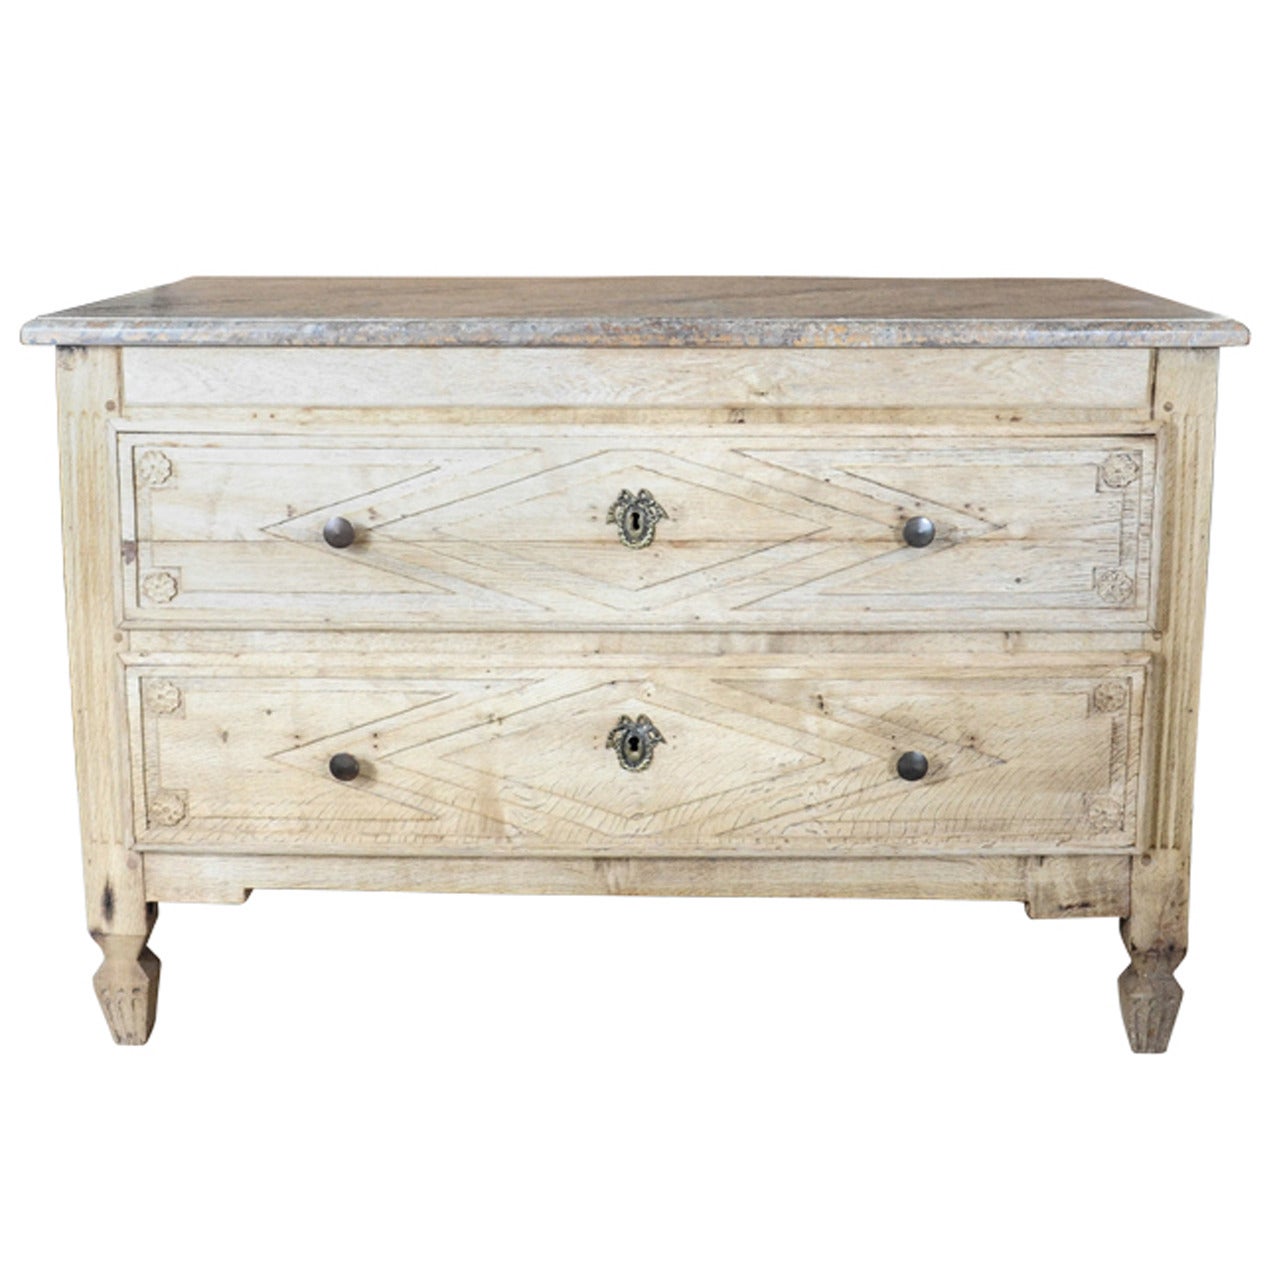 19th.Century French Louis Seize Commode For Sale